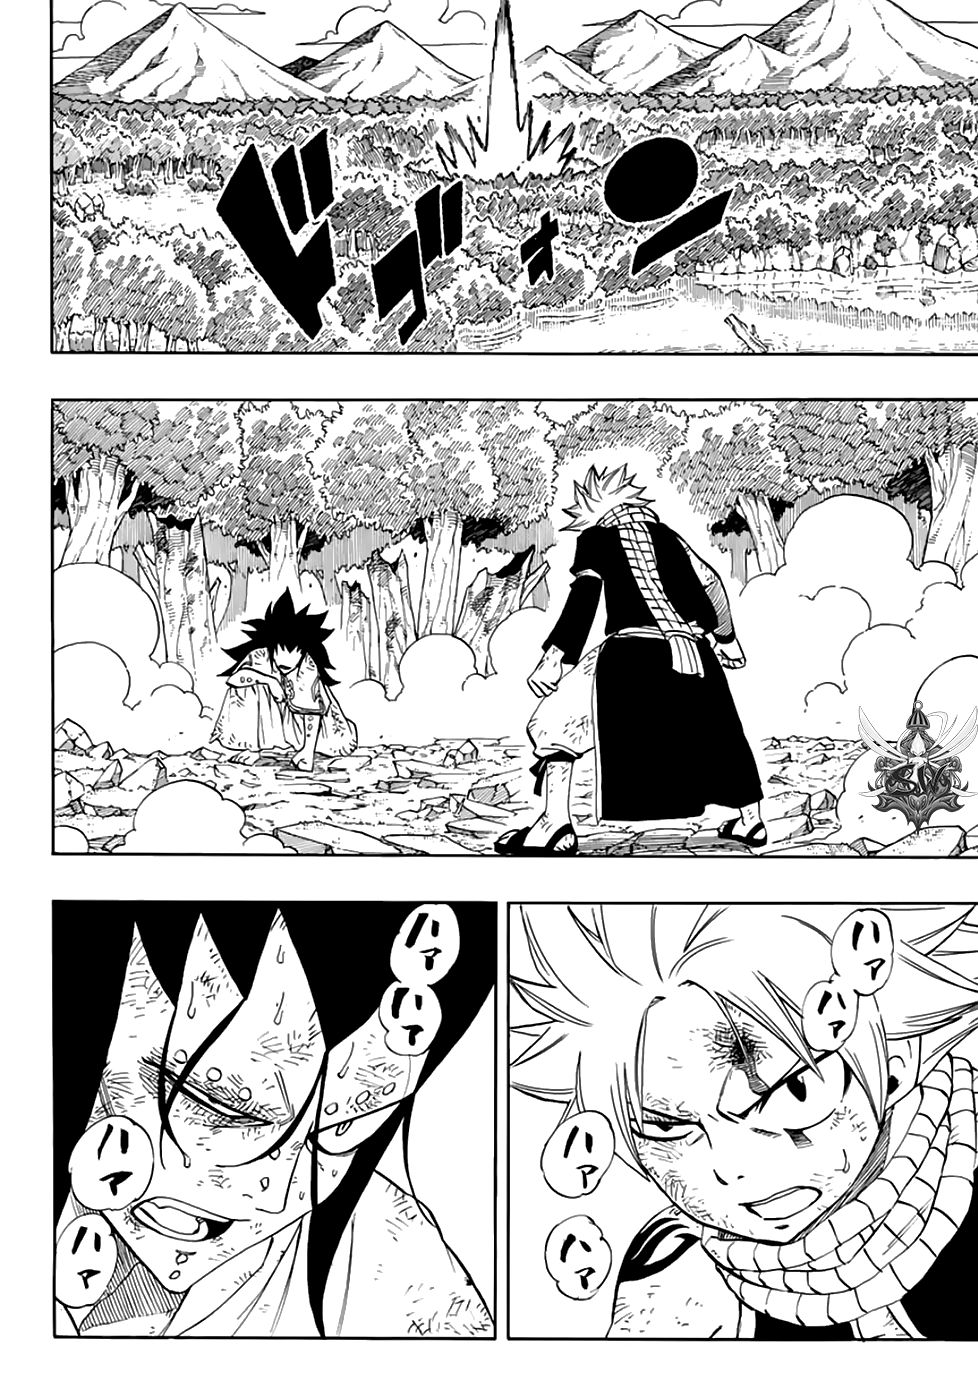 Fairy Tail: 100 Years Quest 33 TH